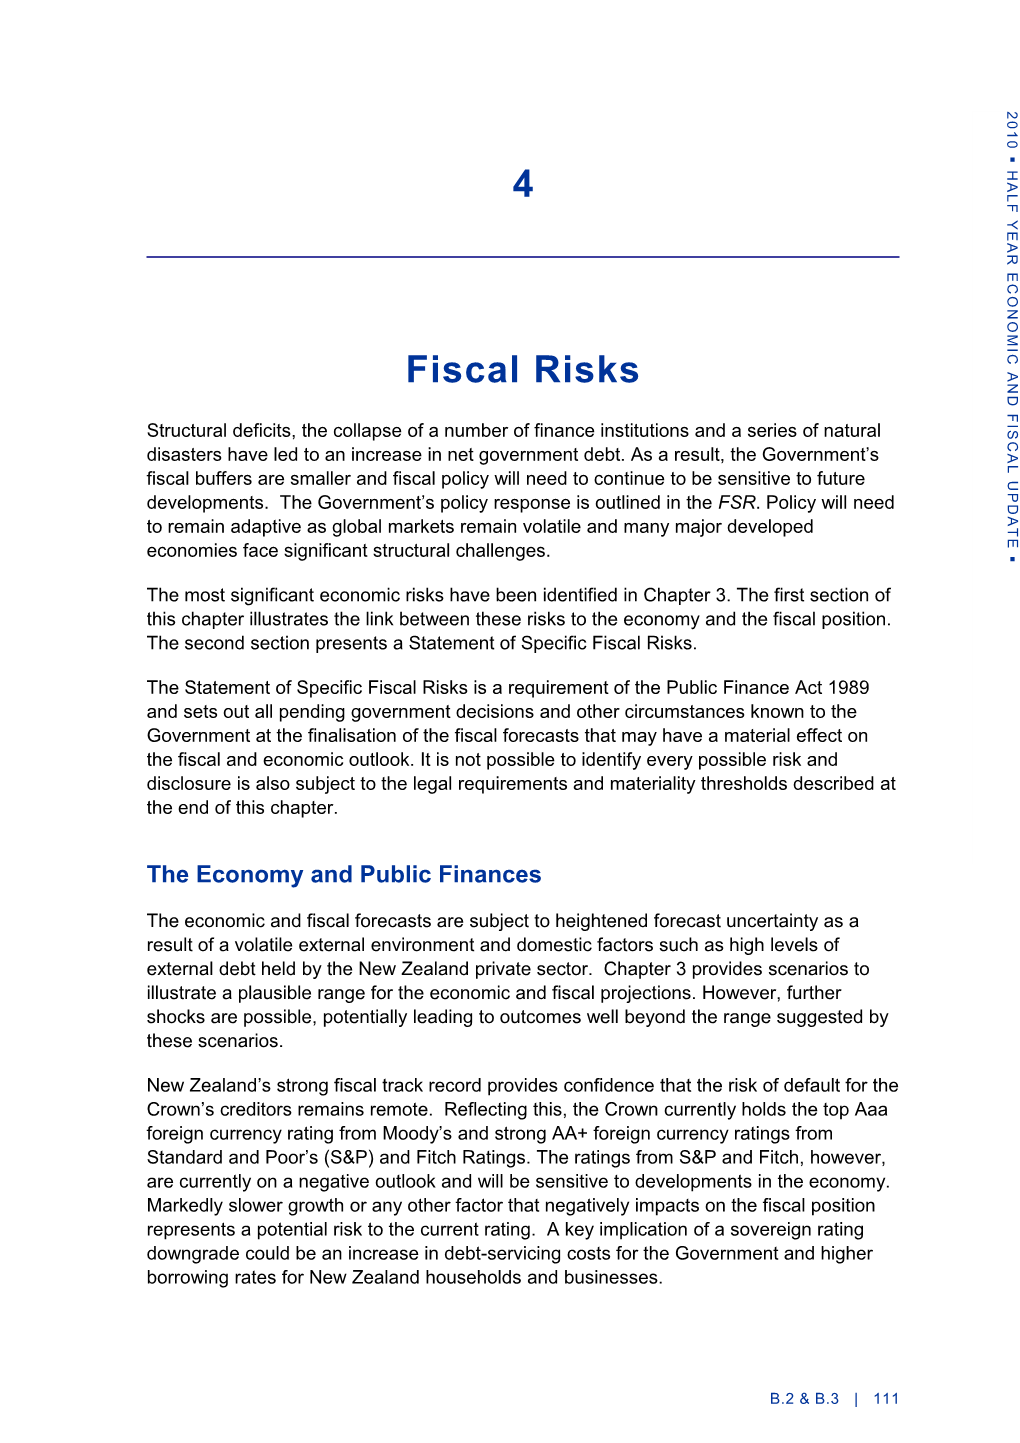 Fiscal Risks - Budget Economic and Fiscal Update 2011 - 19 May 2011 - Budget 2011